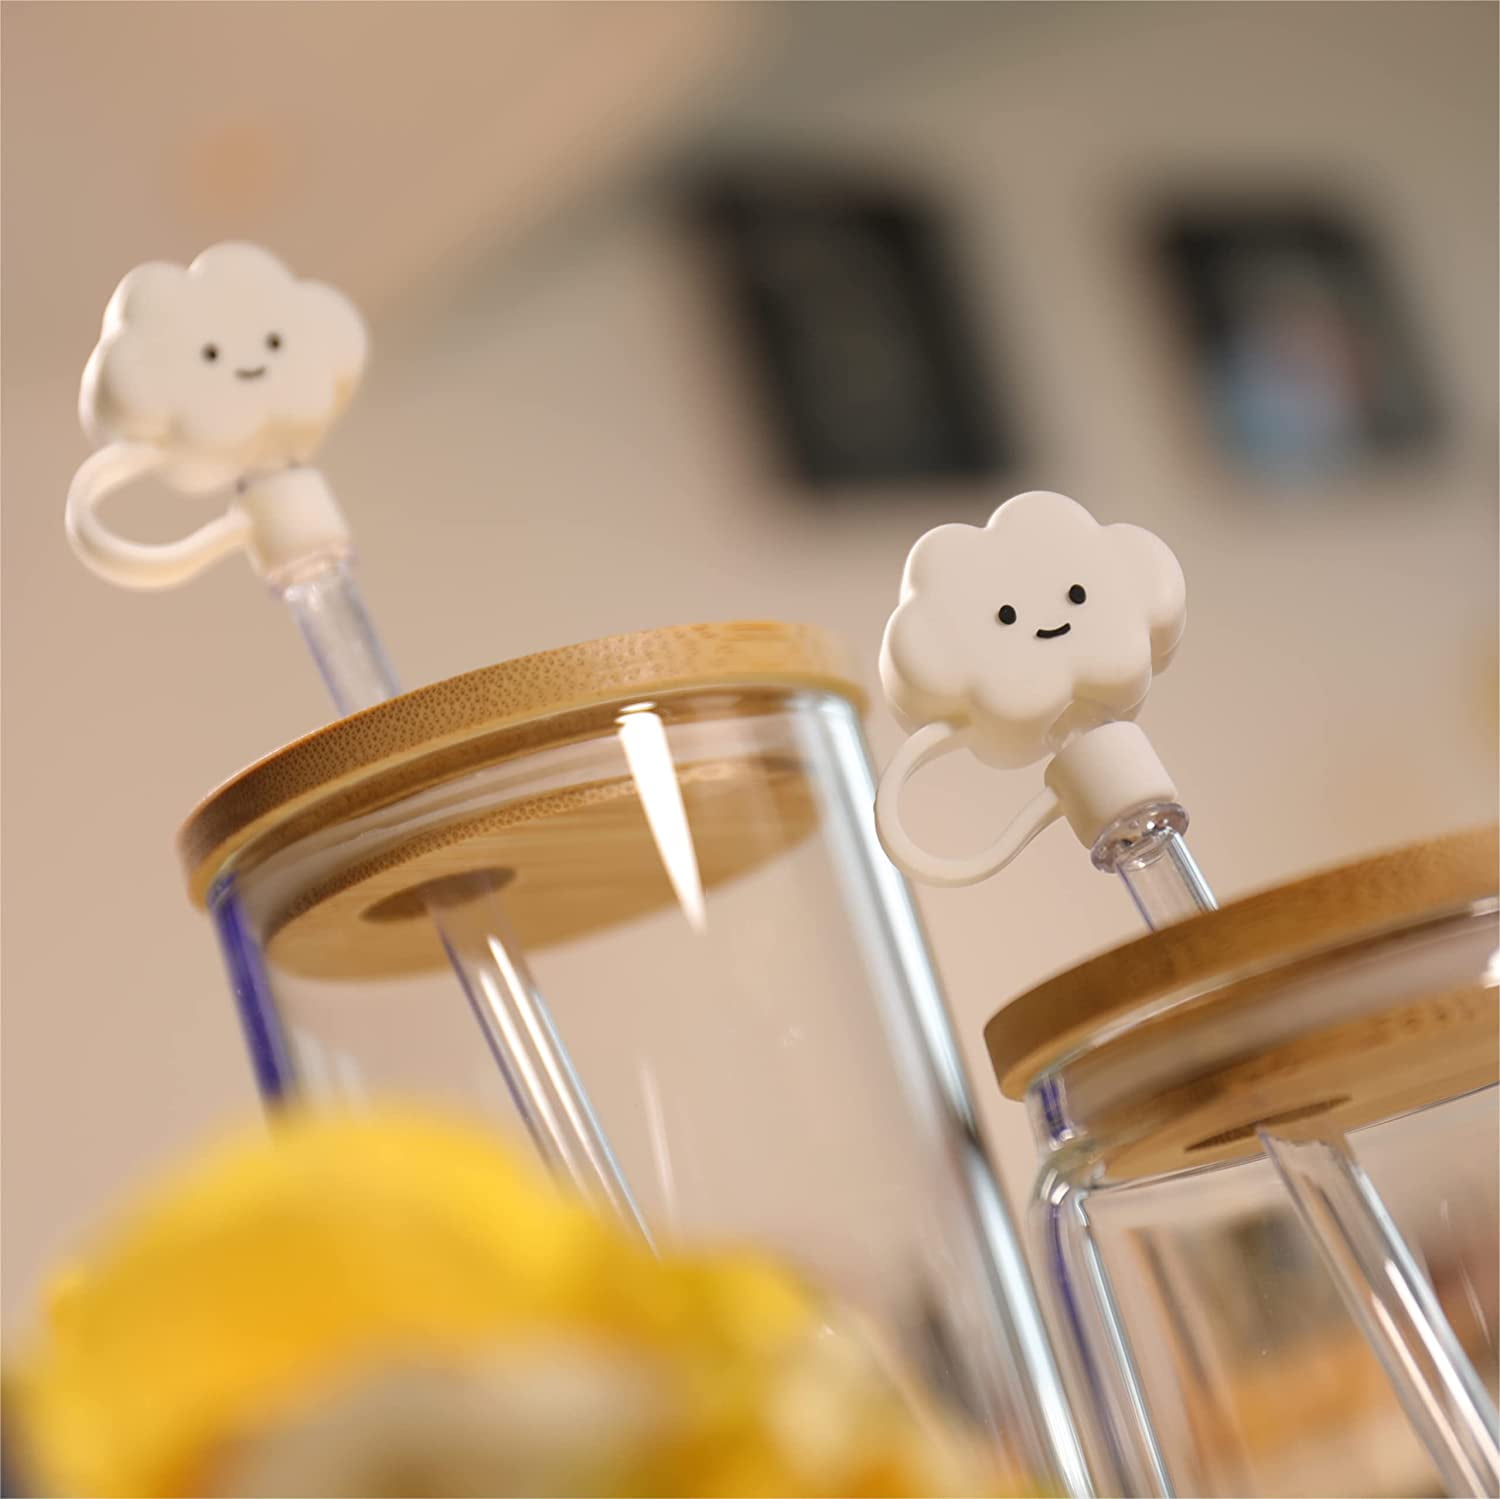 Creative Silicone Cloud Straw Cover No Peculiar Smell Durable Straw Plug  for Cup Straw Accessories White Cloud